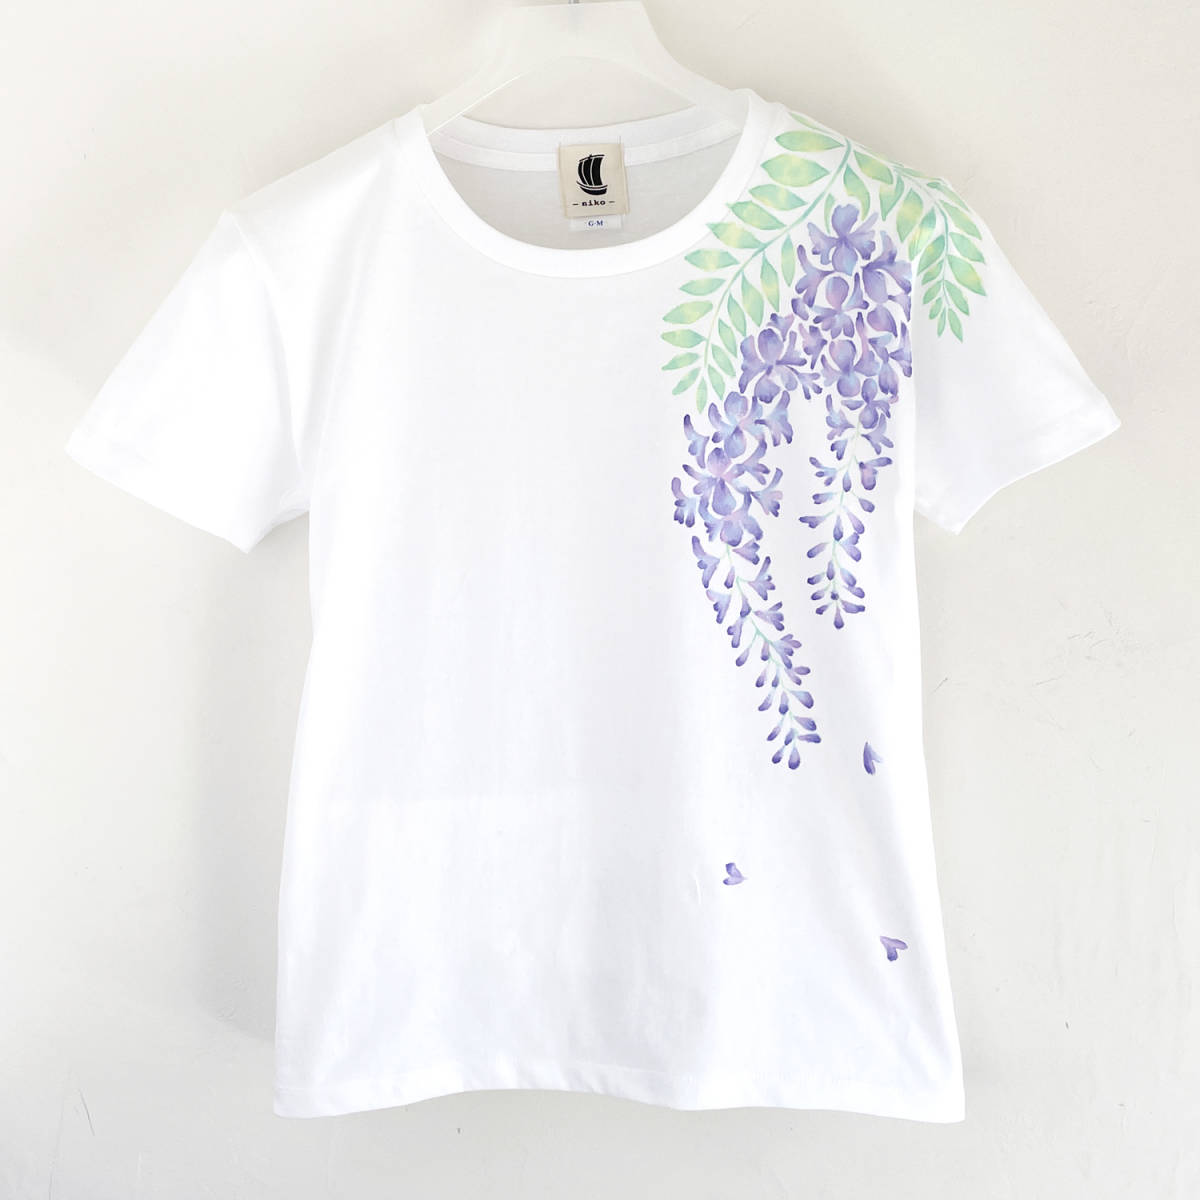 Women's T-shirt, size L, white, wisteria flower pattern T-shirt, handmade, hand-painted T-shirt, Large size, Crew neck, Patterned